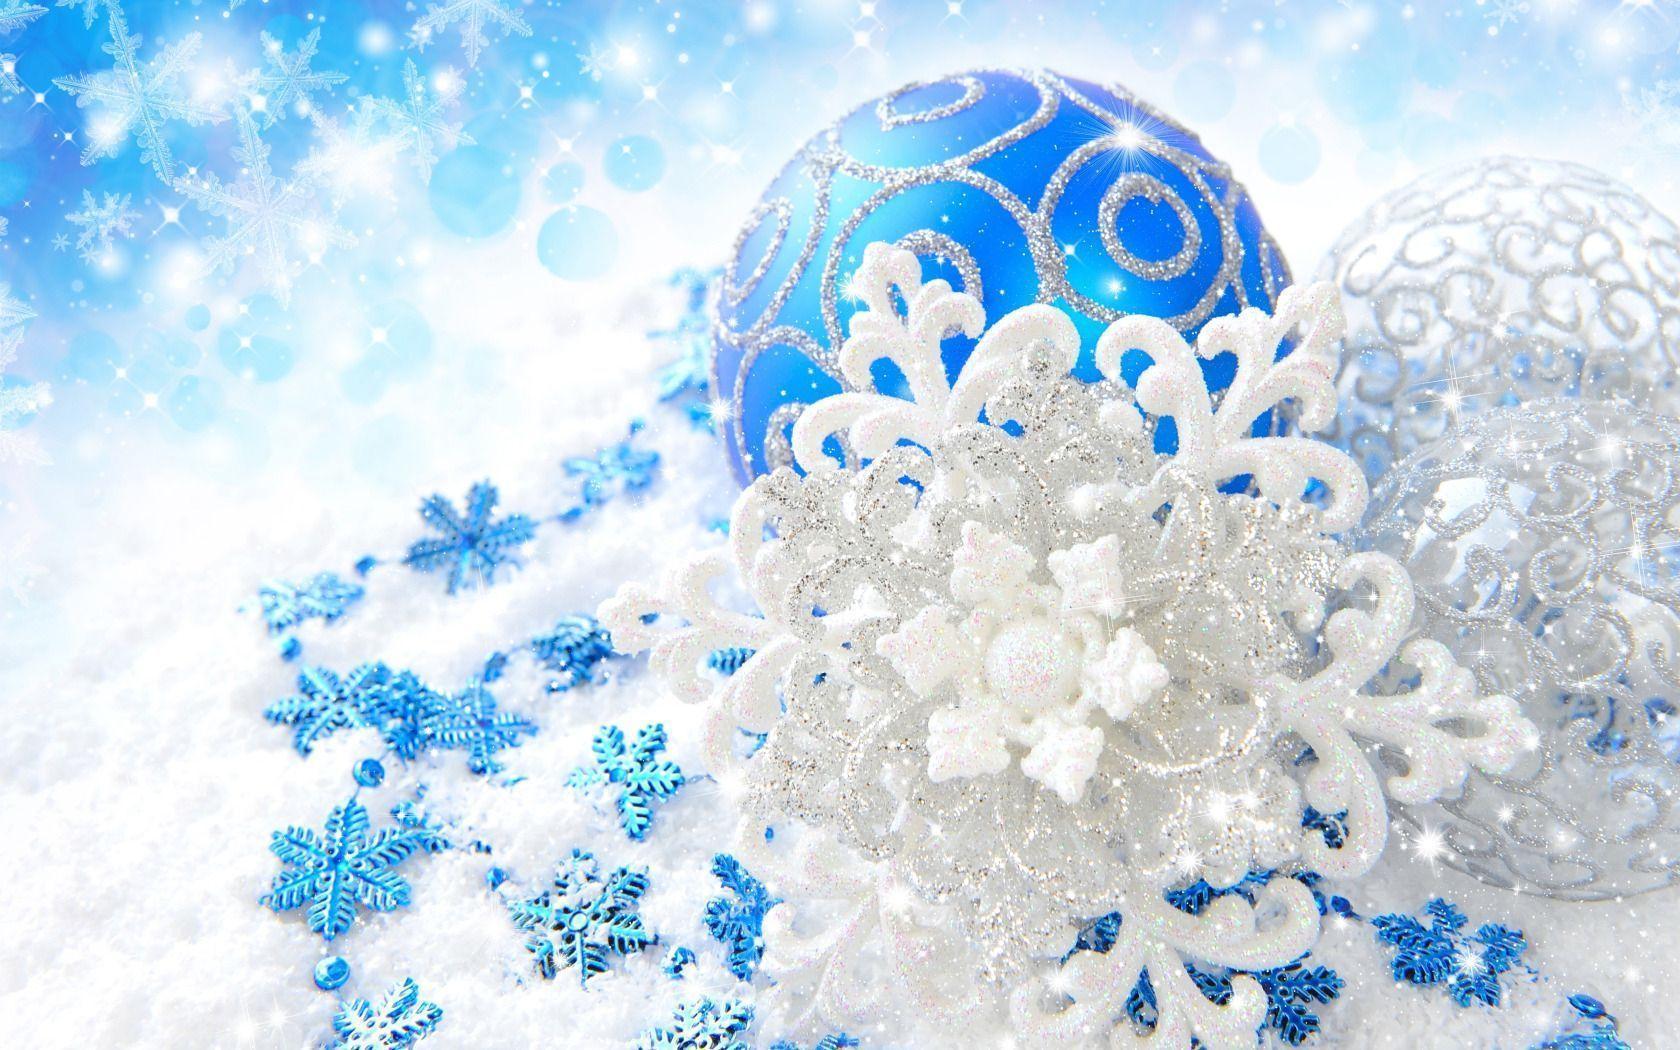 Blue and Silver Christmas Decorations widescreen wallpaper. Wide